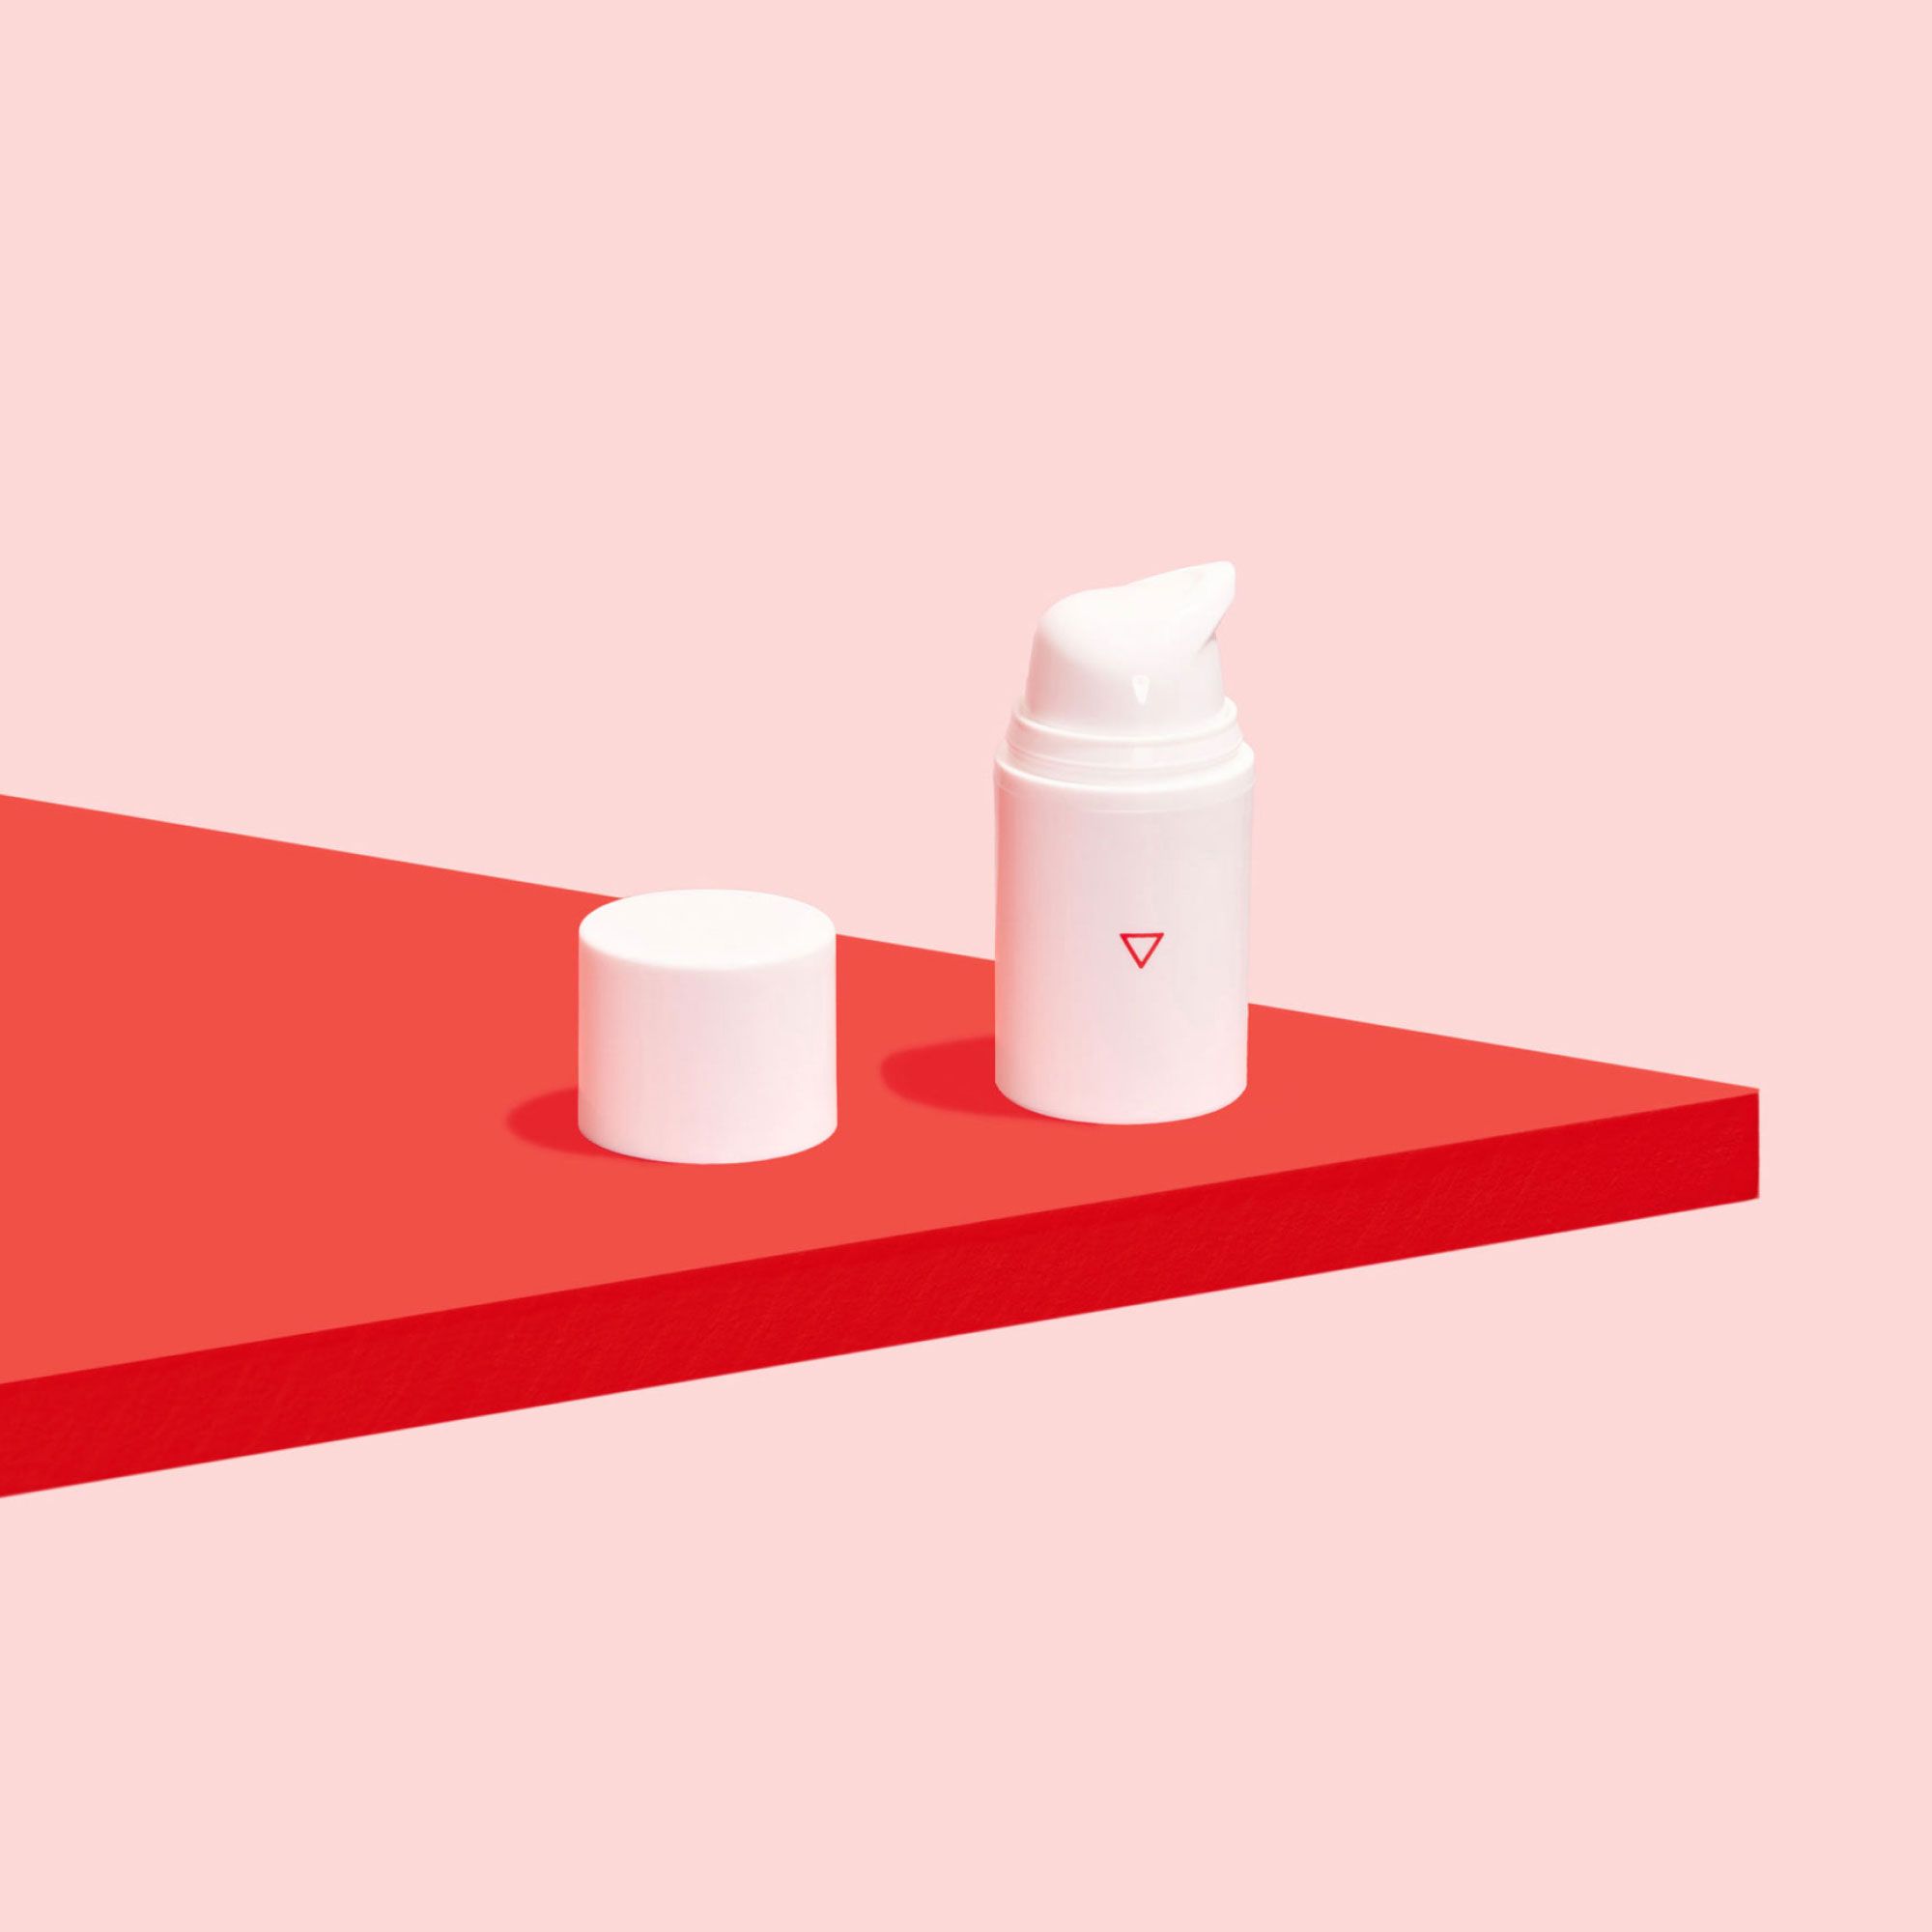 Bottle of clindamycin cream to treat bacterial vaginosis on a pink background and red surface